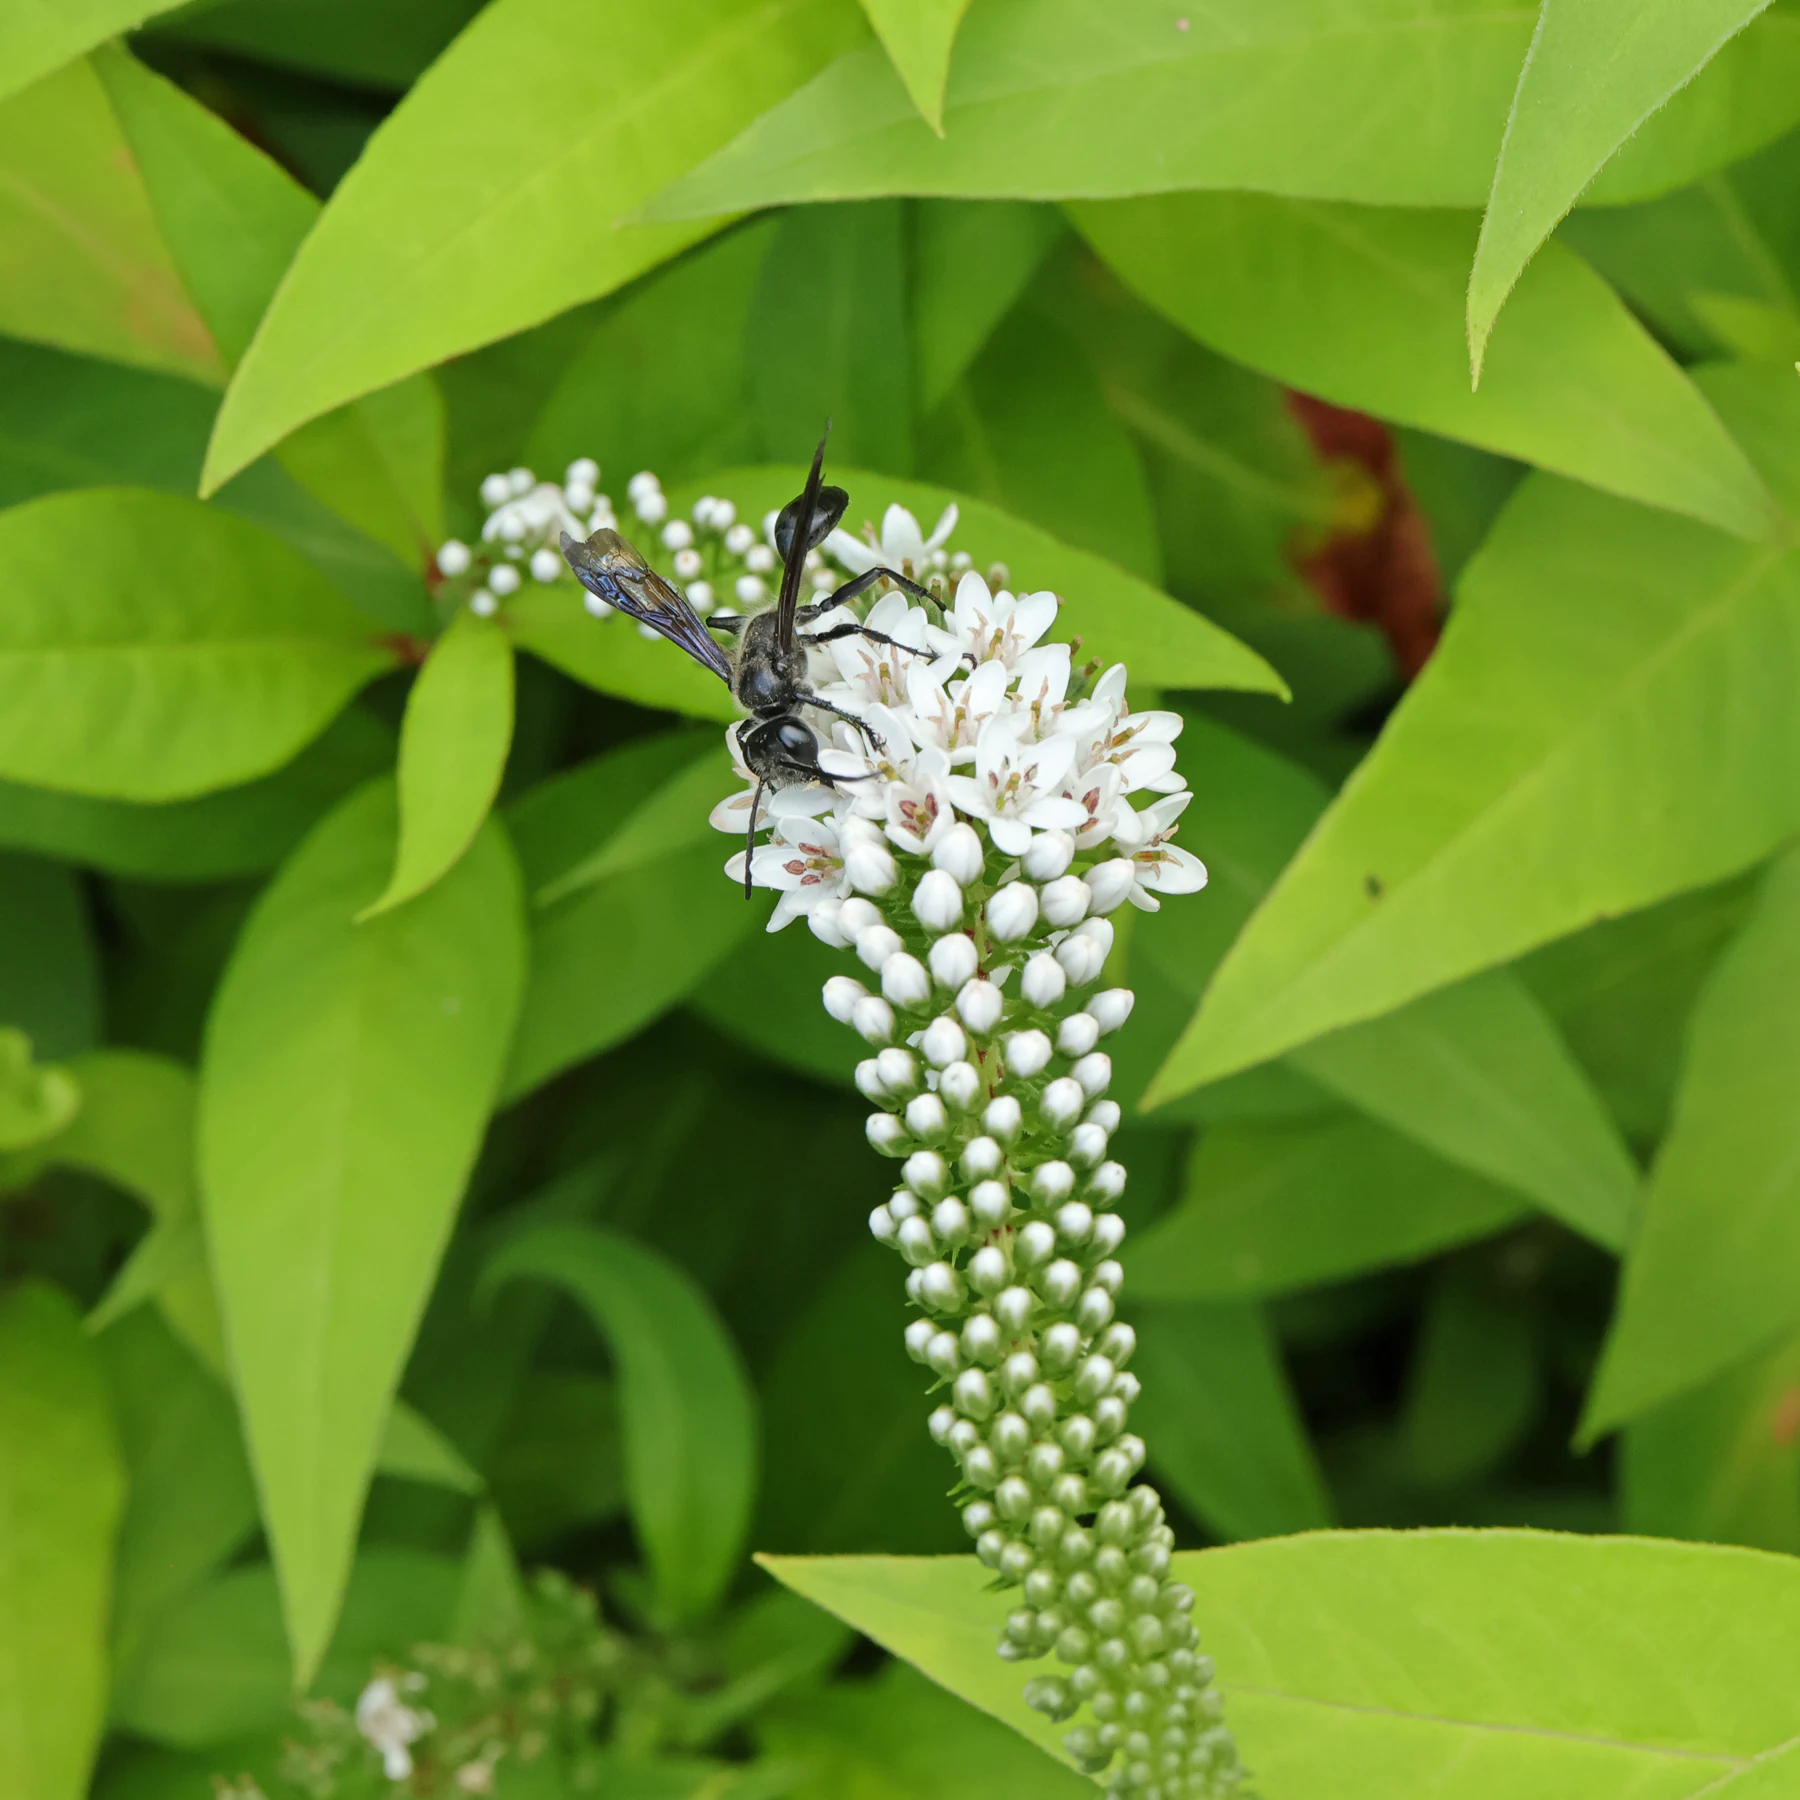 Mexican grass carrying wasp on gooseneck loosestrife